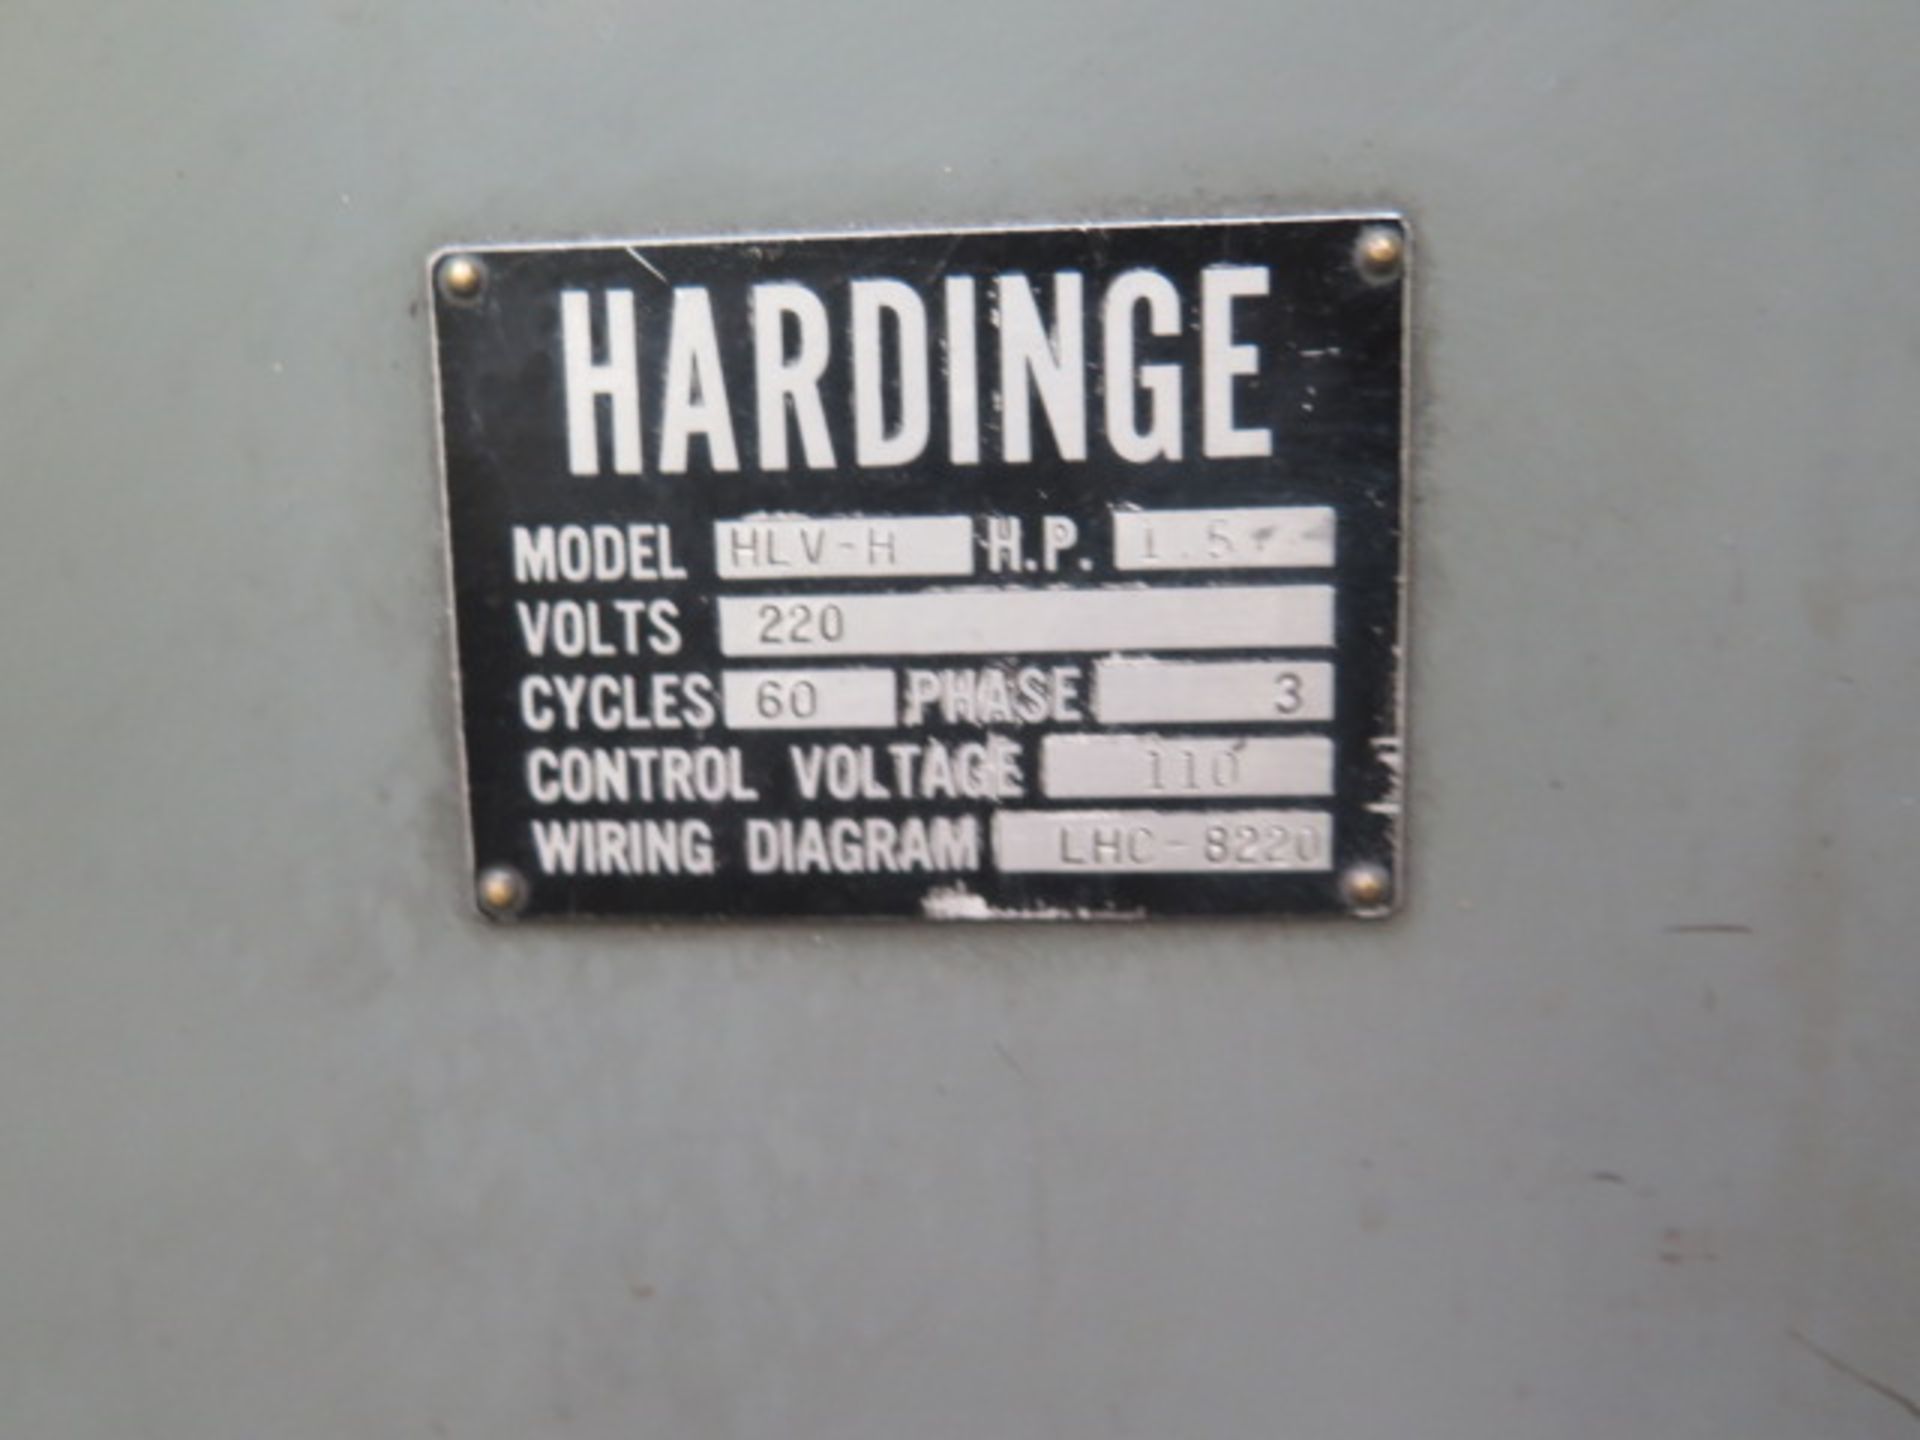 Hardinge HLV-H Tool Room Lathe s/n HLV-H-4836 w/ 125-3000 RPM, Inch Threading, Tailstock, SOLD AS IS - Image 14 of 14